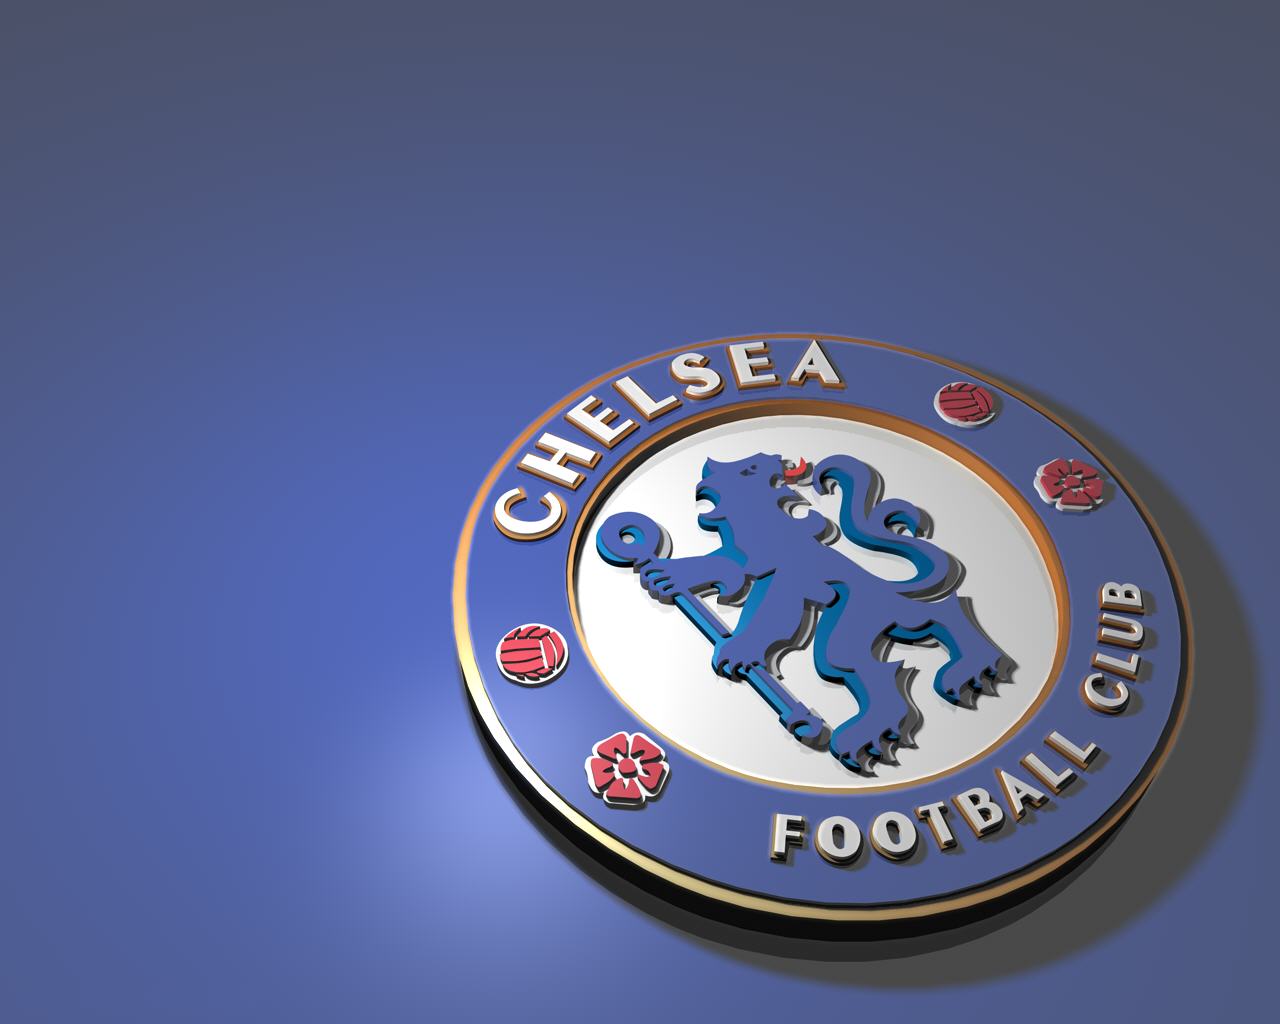 World Sports Hd Wallpapers Chelsea Fc Hd Wallpapers